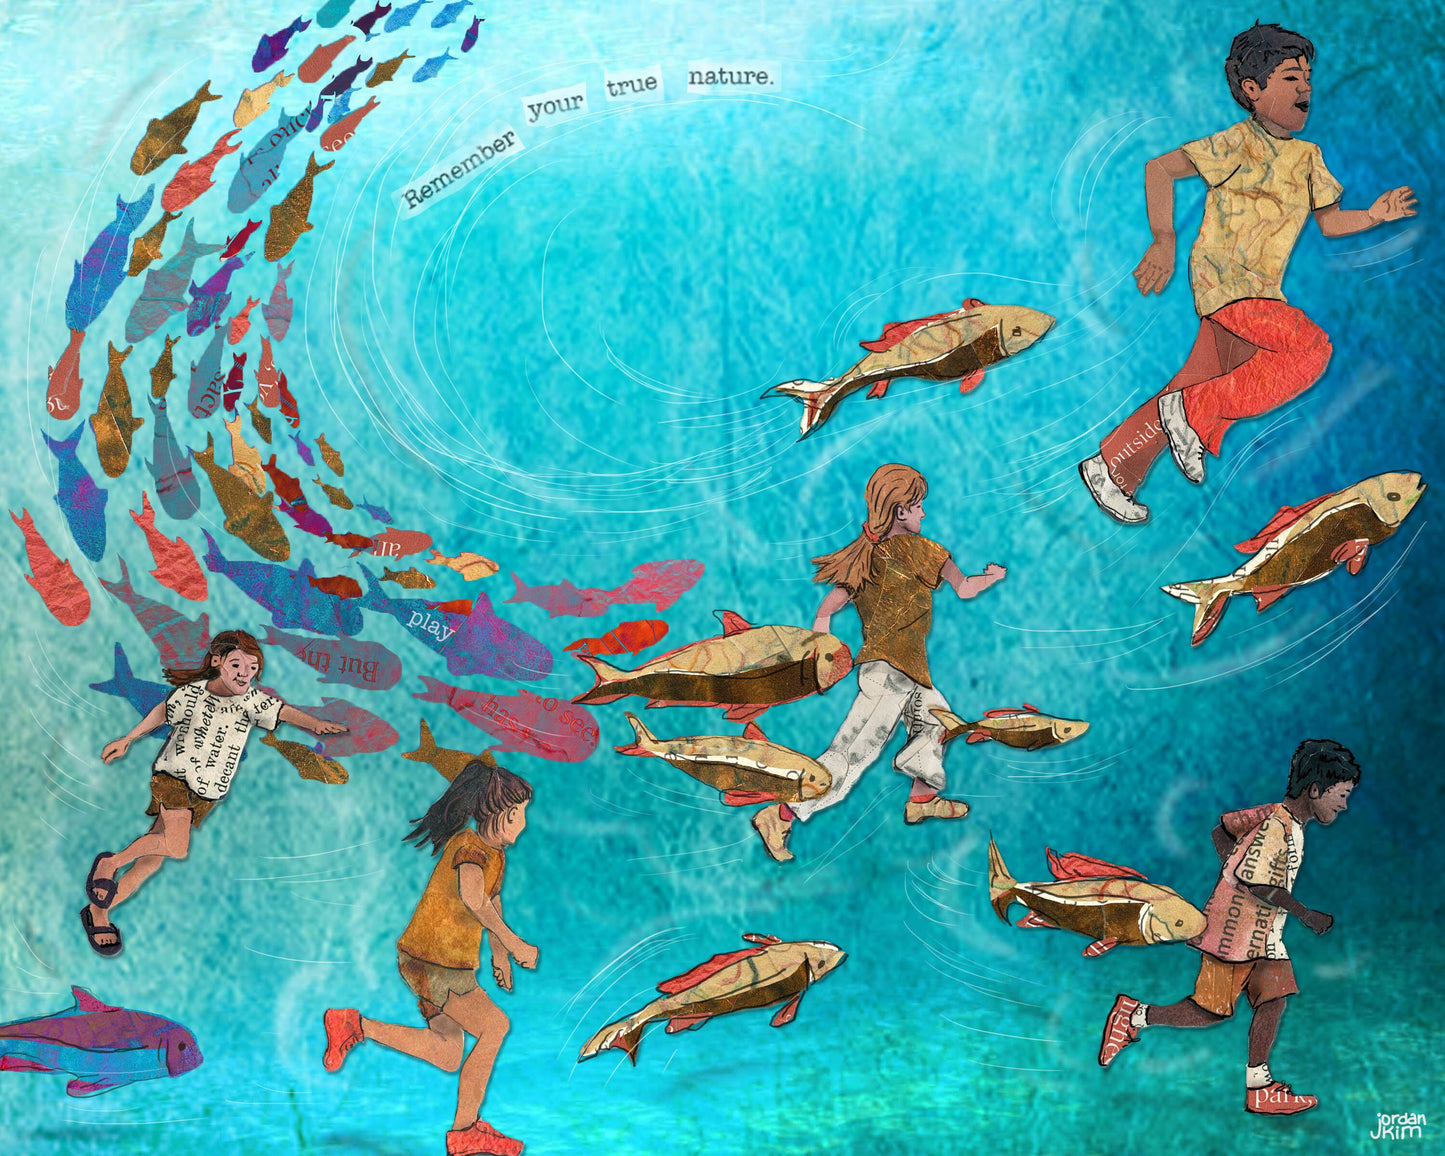 Greeting Card of mixed media collage of children playing tag with schooling fish underwater, play, connection to nature - Blank Inside